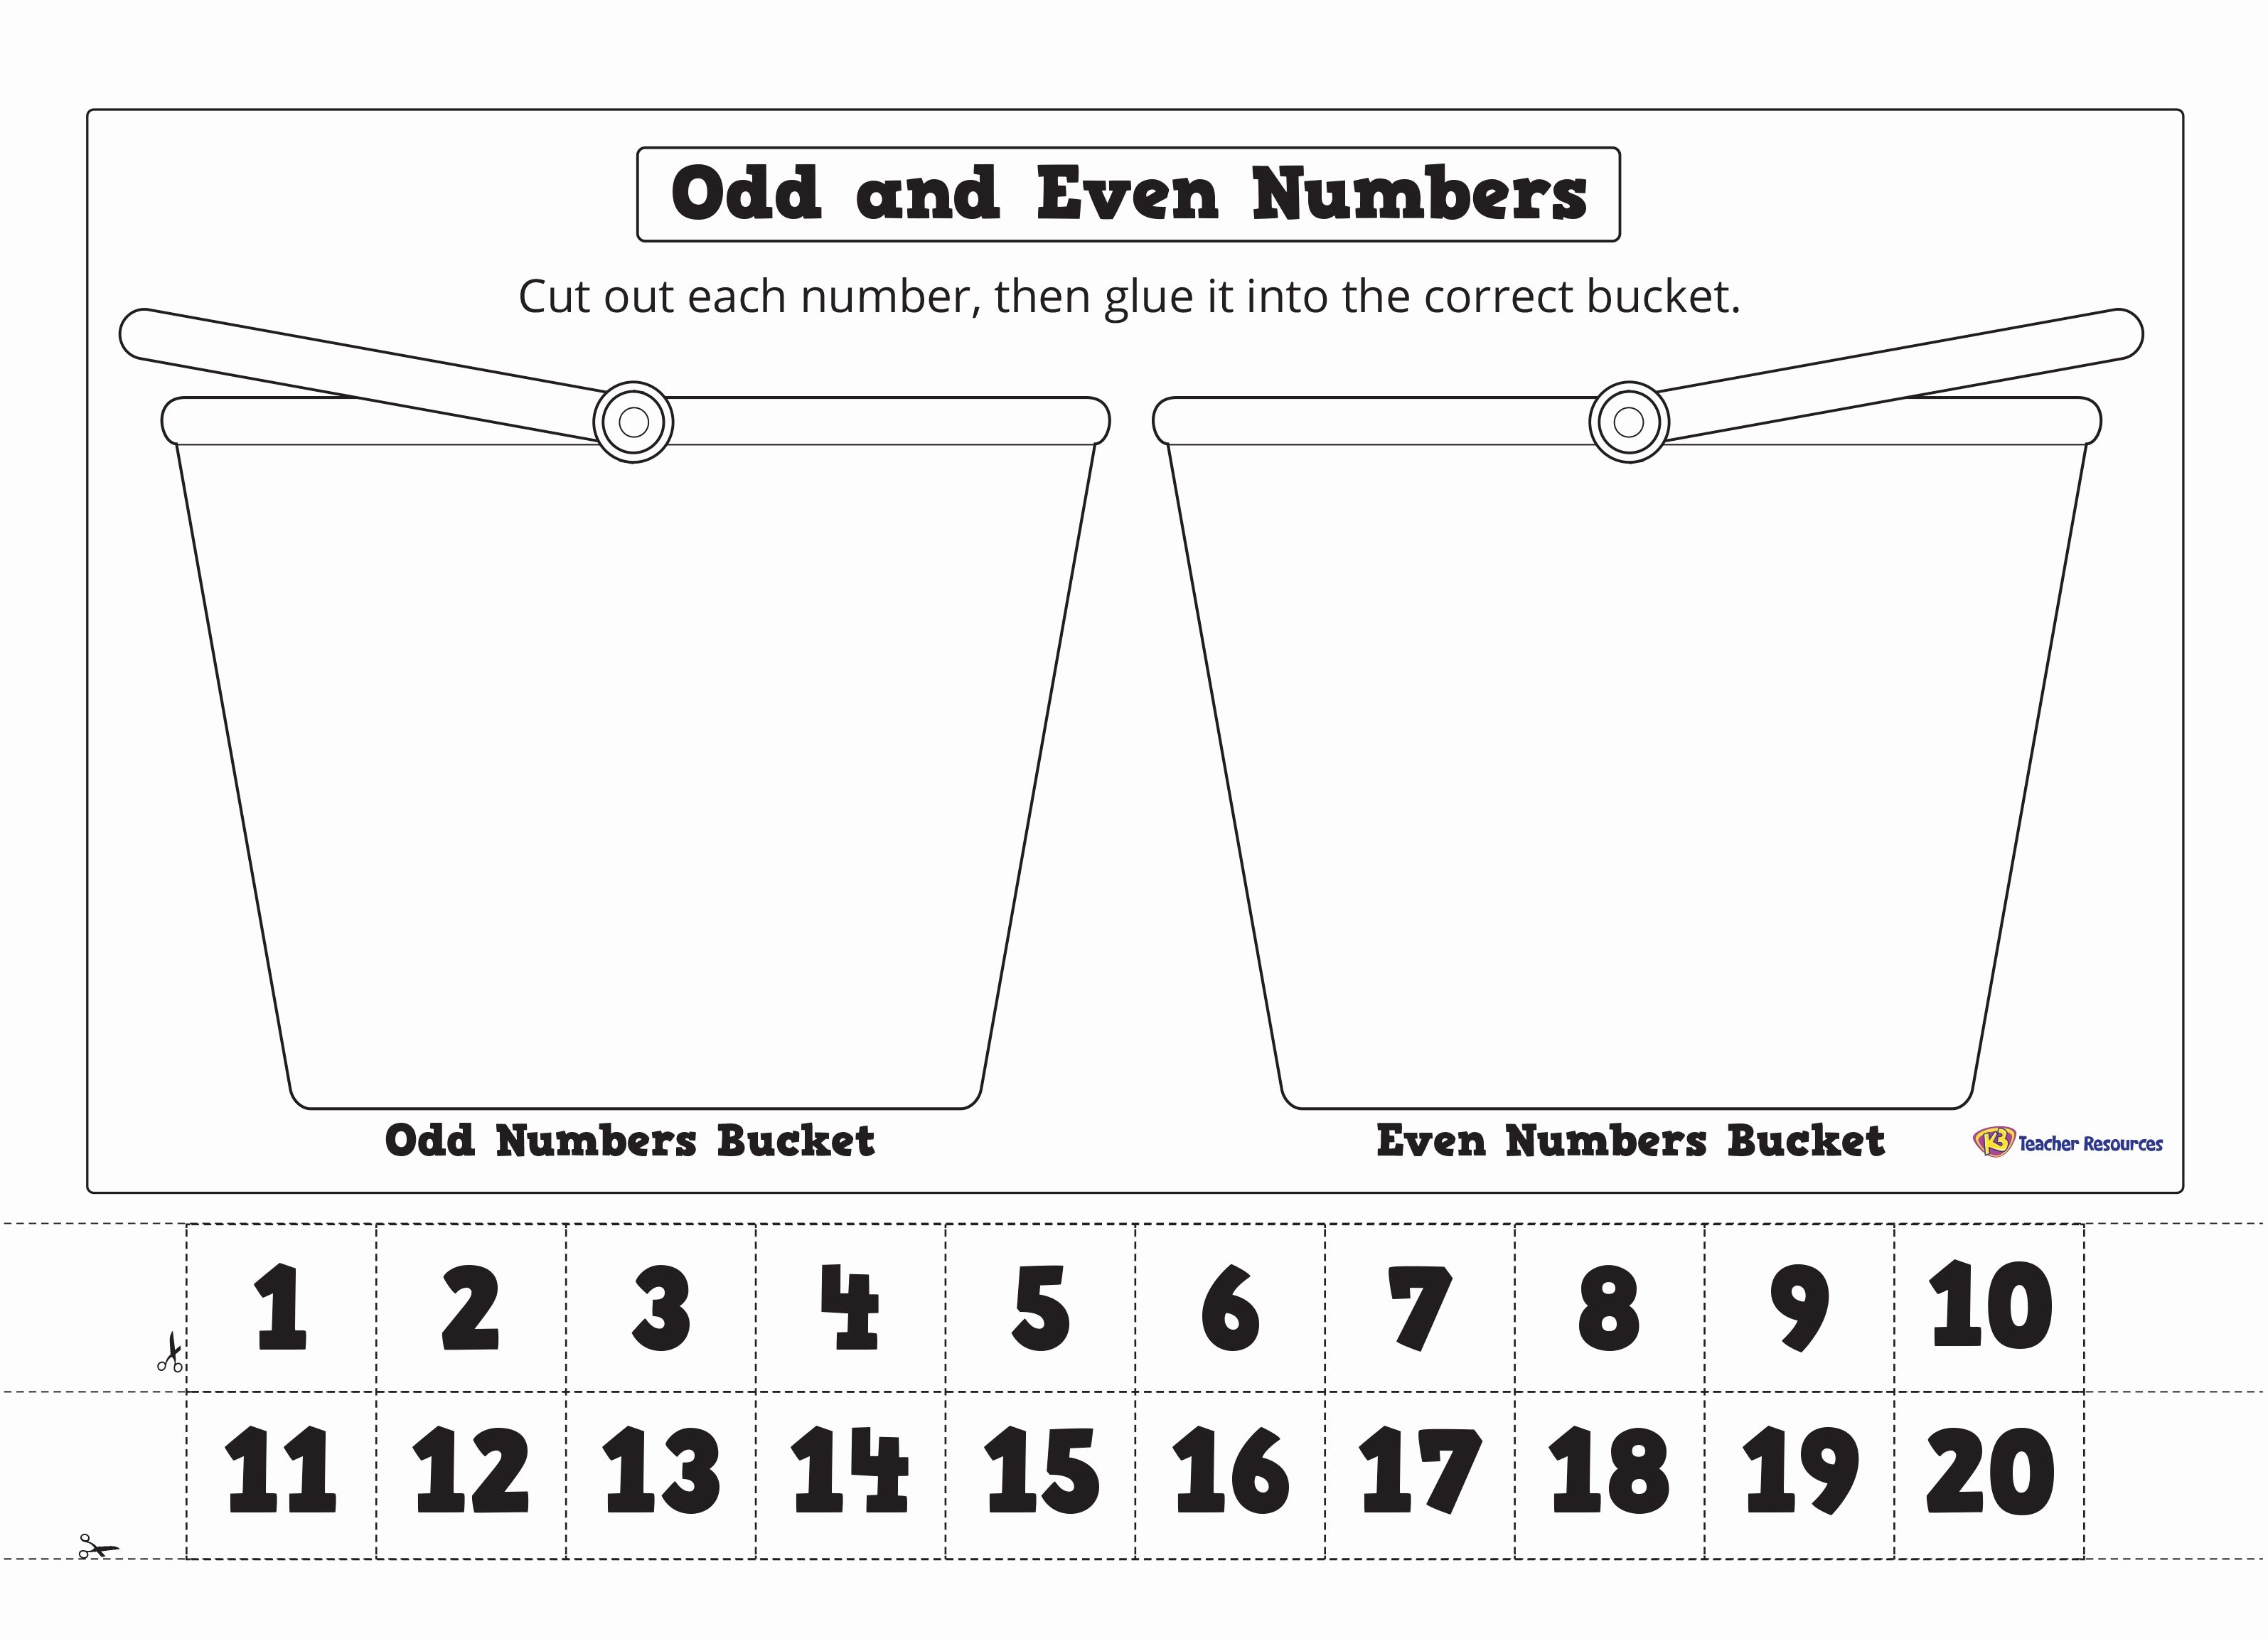 Odds and even Worksheet Inspirational Odd and even Numbers Cut and Paste Bucket Worksheet K